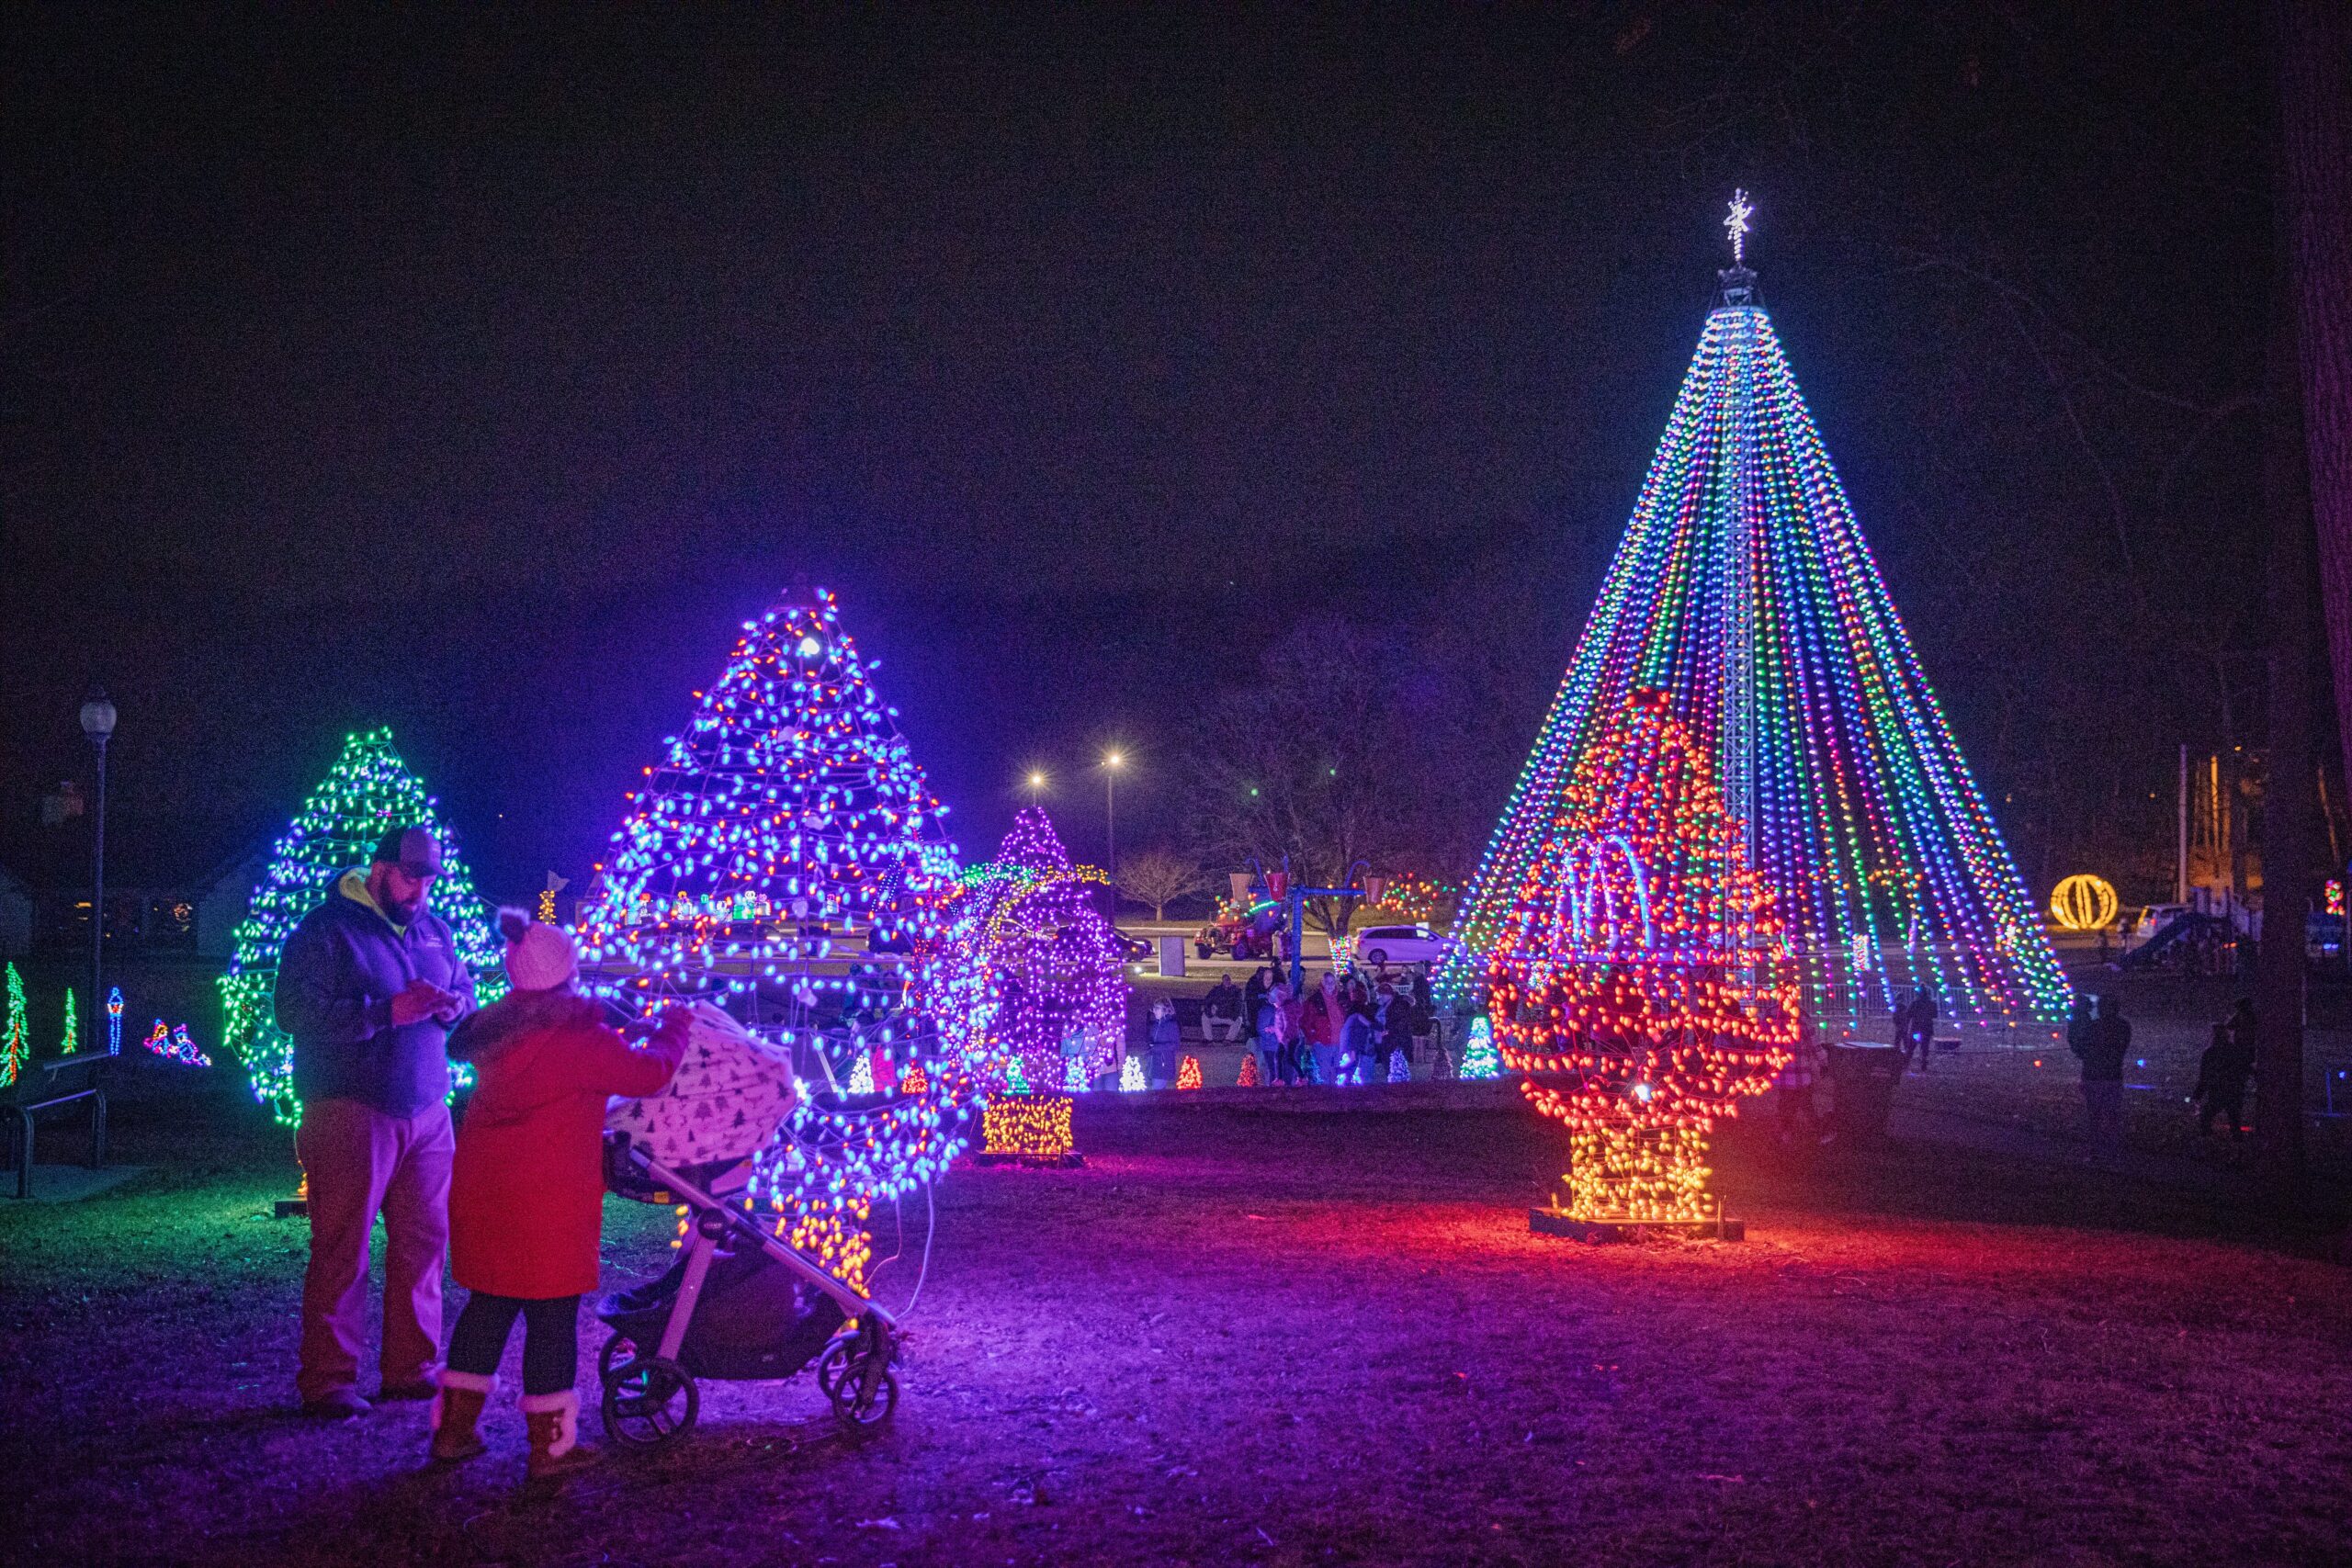 Man and woman with baby stroller next to trees with holiday lights